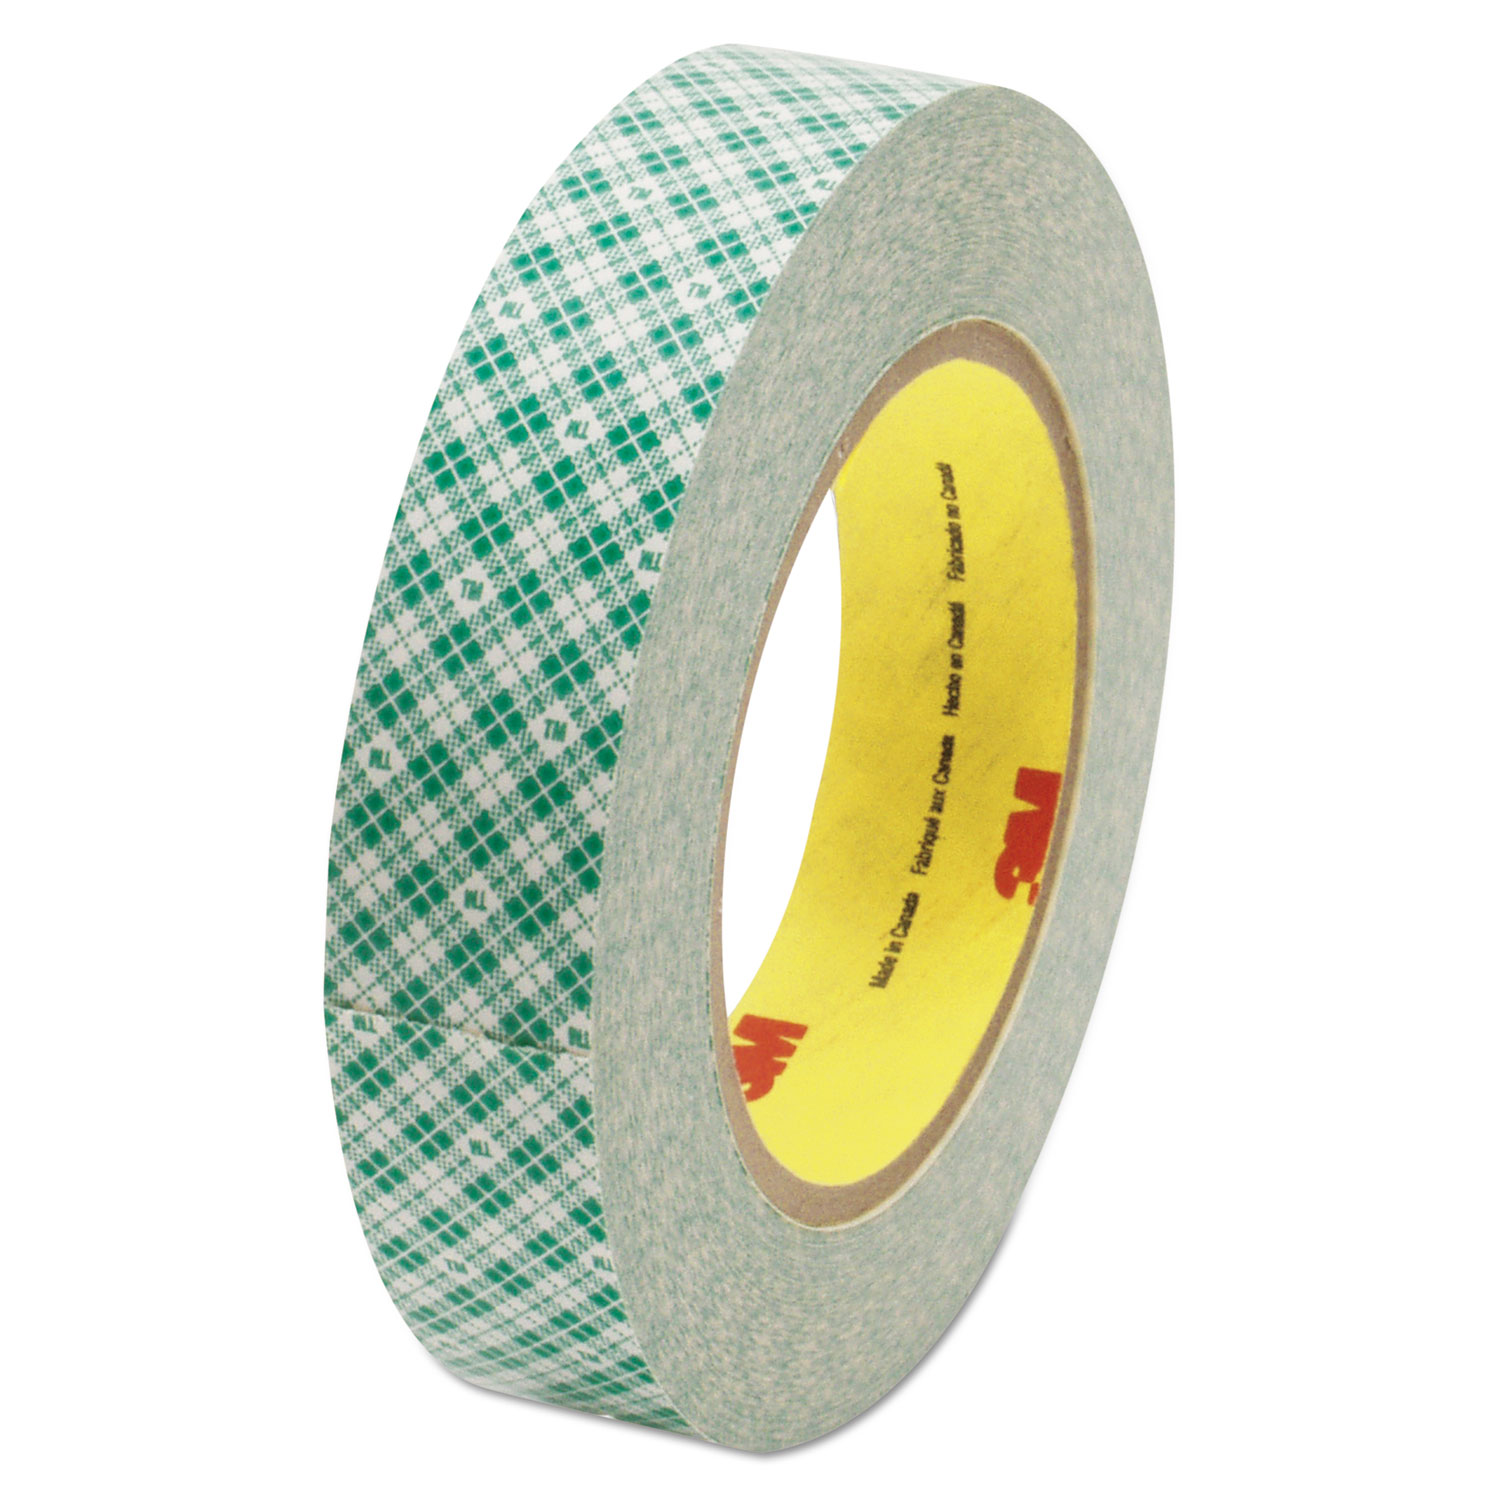  3M 410M Double-Coated Tissue Tape, 3 Core, 1 x 36 yds, White (MMM410M) 